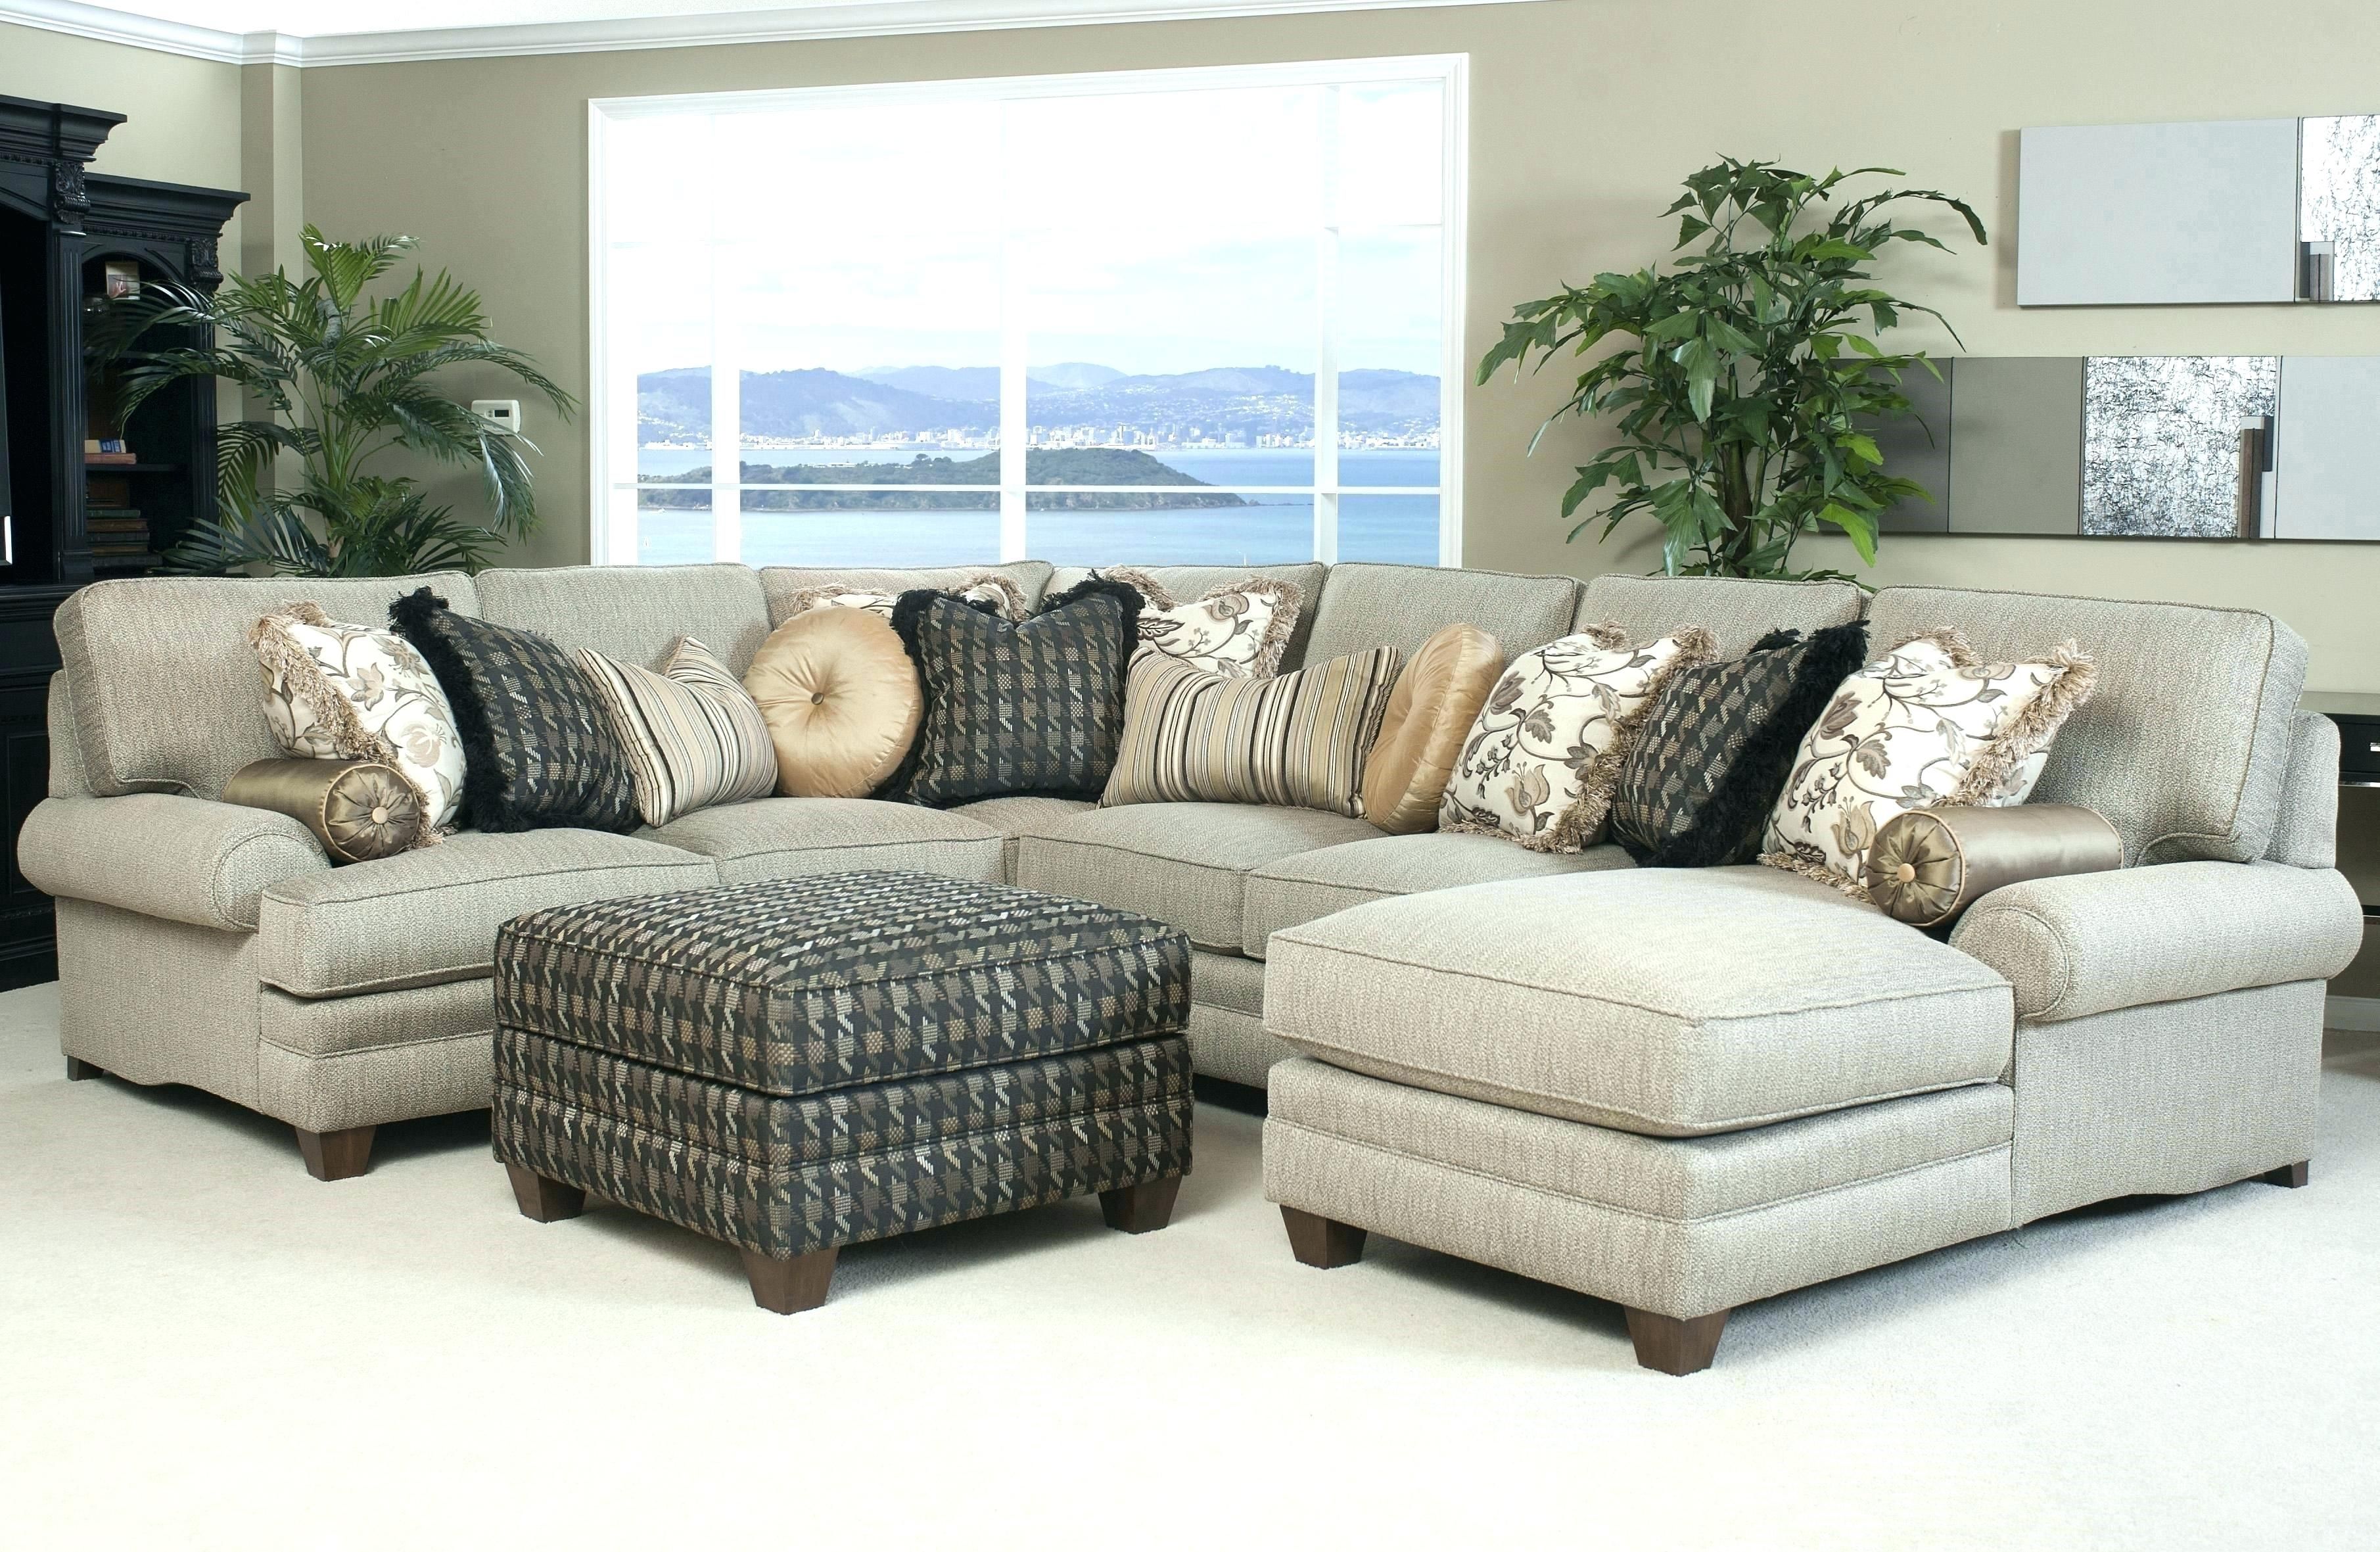 Cheap Sectional Sofas For Sale Ofa Ale Ued A Used Ottawa Leather Throughout Ottawa Sale Sectional Sofas (Photo 1 of 10)